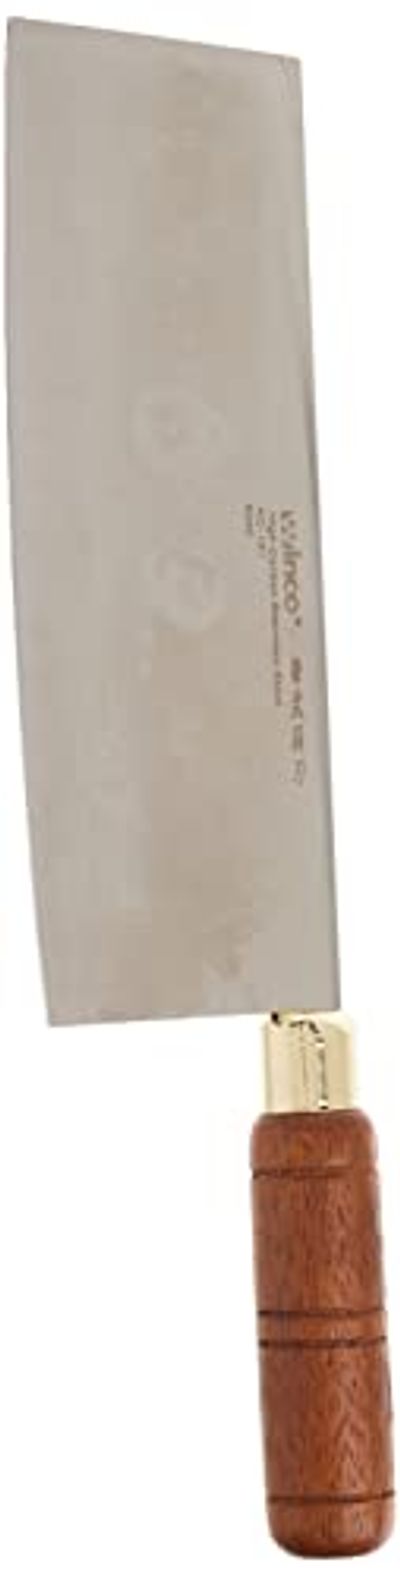 Winco Blade Chinese Cleaver with Wooden Handle, 3-1/2-Inch, Stainless Steel $14.35 (Reg $22.30)